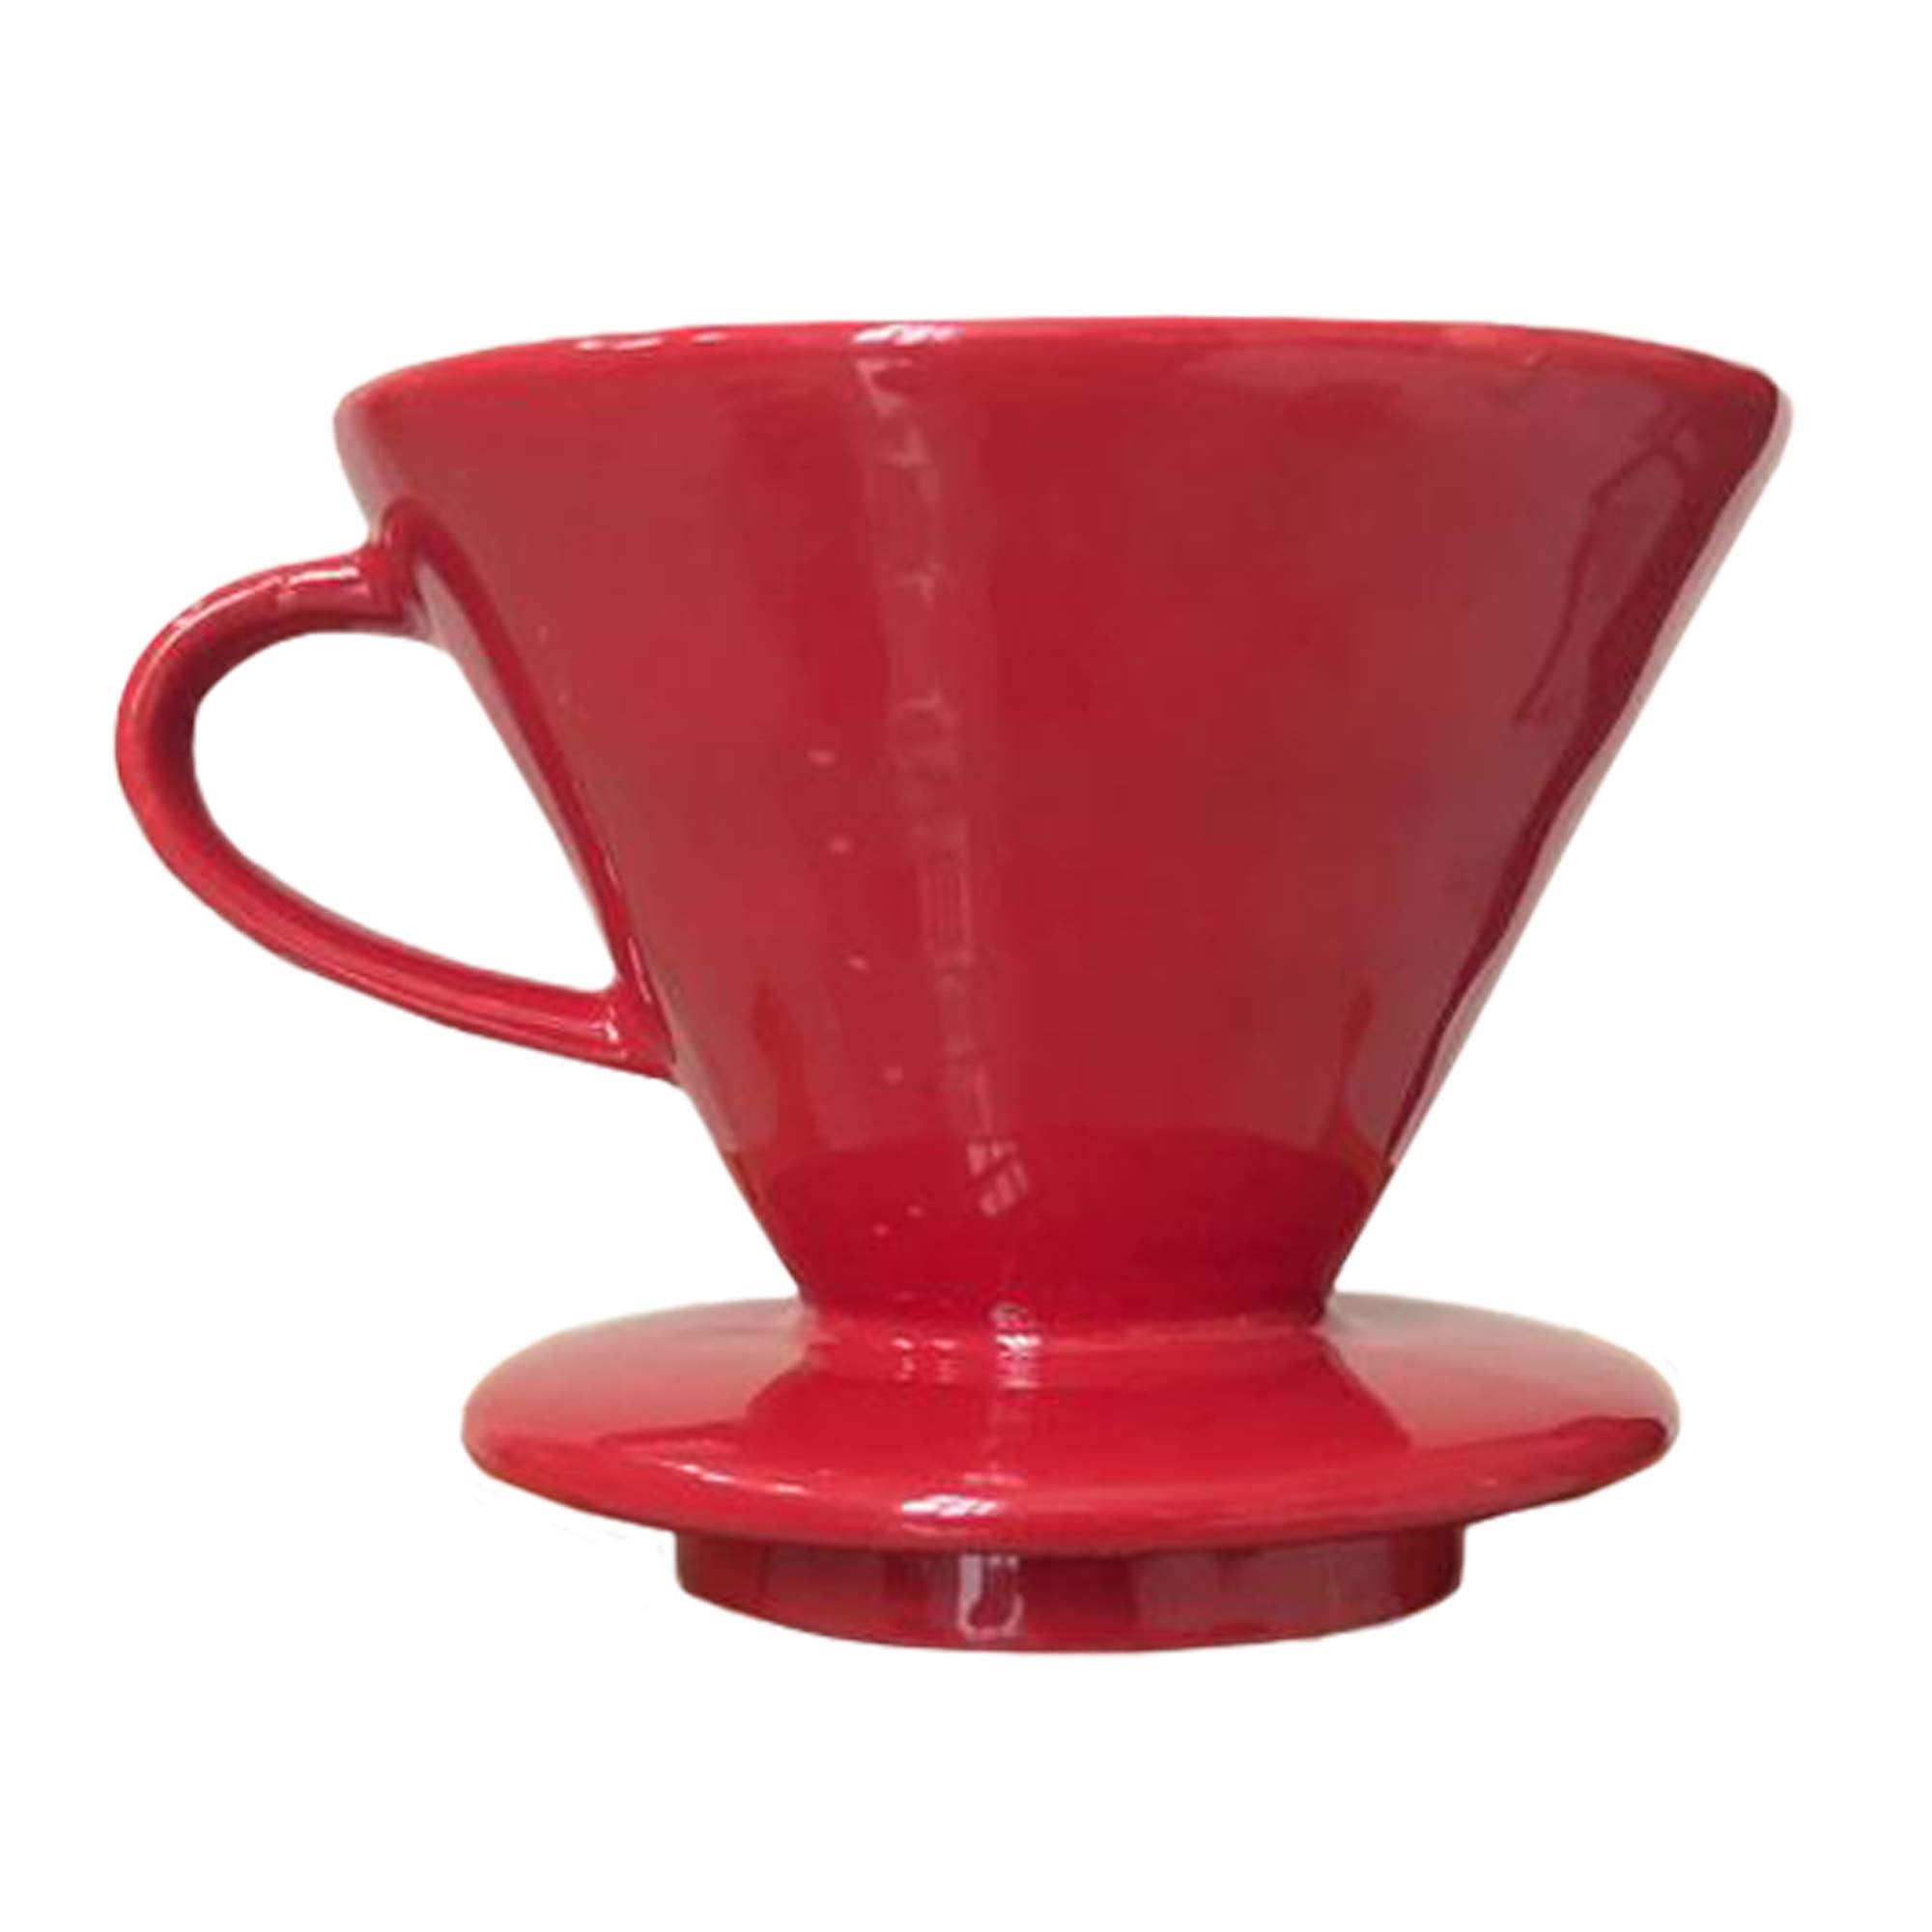 Kajava Mama Pour Over Coffee Dripper - Ceramic Slow Brewing Accessories for Home, Cafe, Restaurants - Easy Manual Brew Maker Gift - Strong Flavor Brewer - V01 Paper Cone Filters - Red, 1 Cup  - Like New